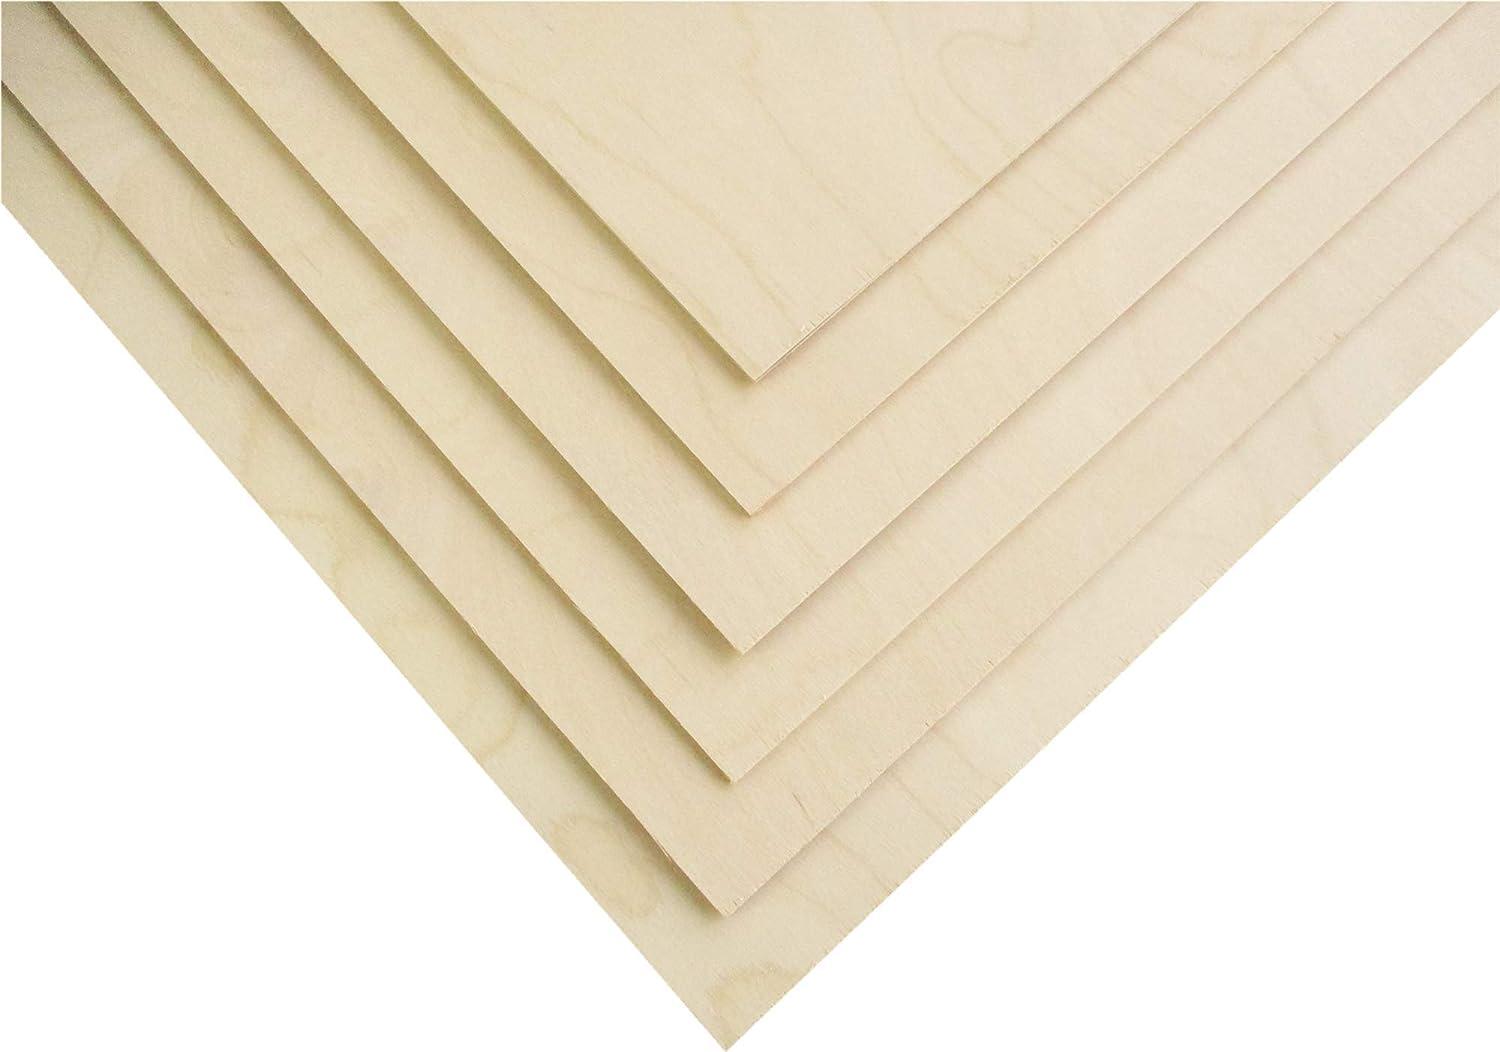 Premium Baltic Birch Plywood,3 mm 1/8x 12x 18 Thin Wood 6 Flat Sheets  with B/BB Grade Veneer for DIY Arts and Crafts,Woodworking,Scroll Sawing